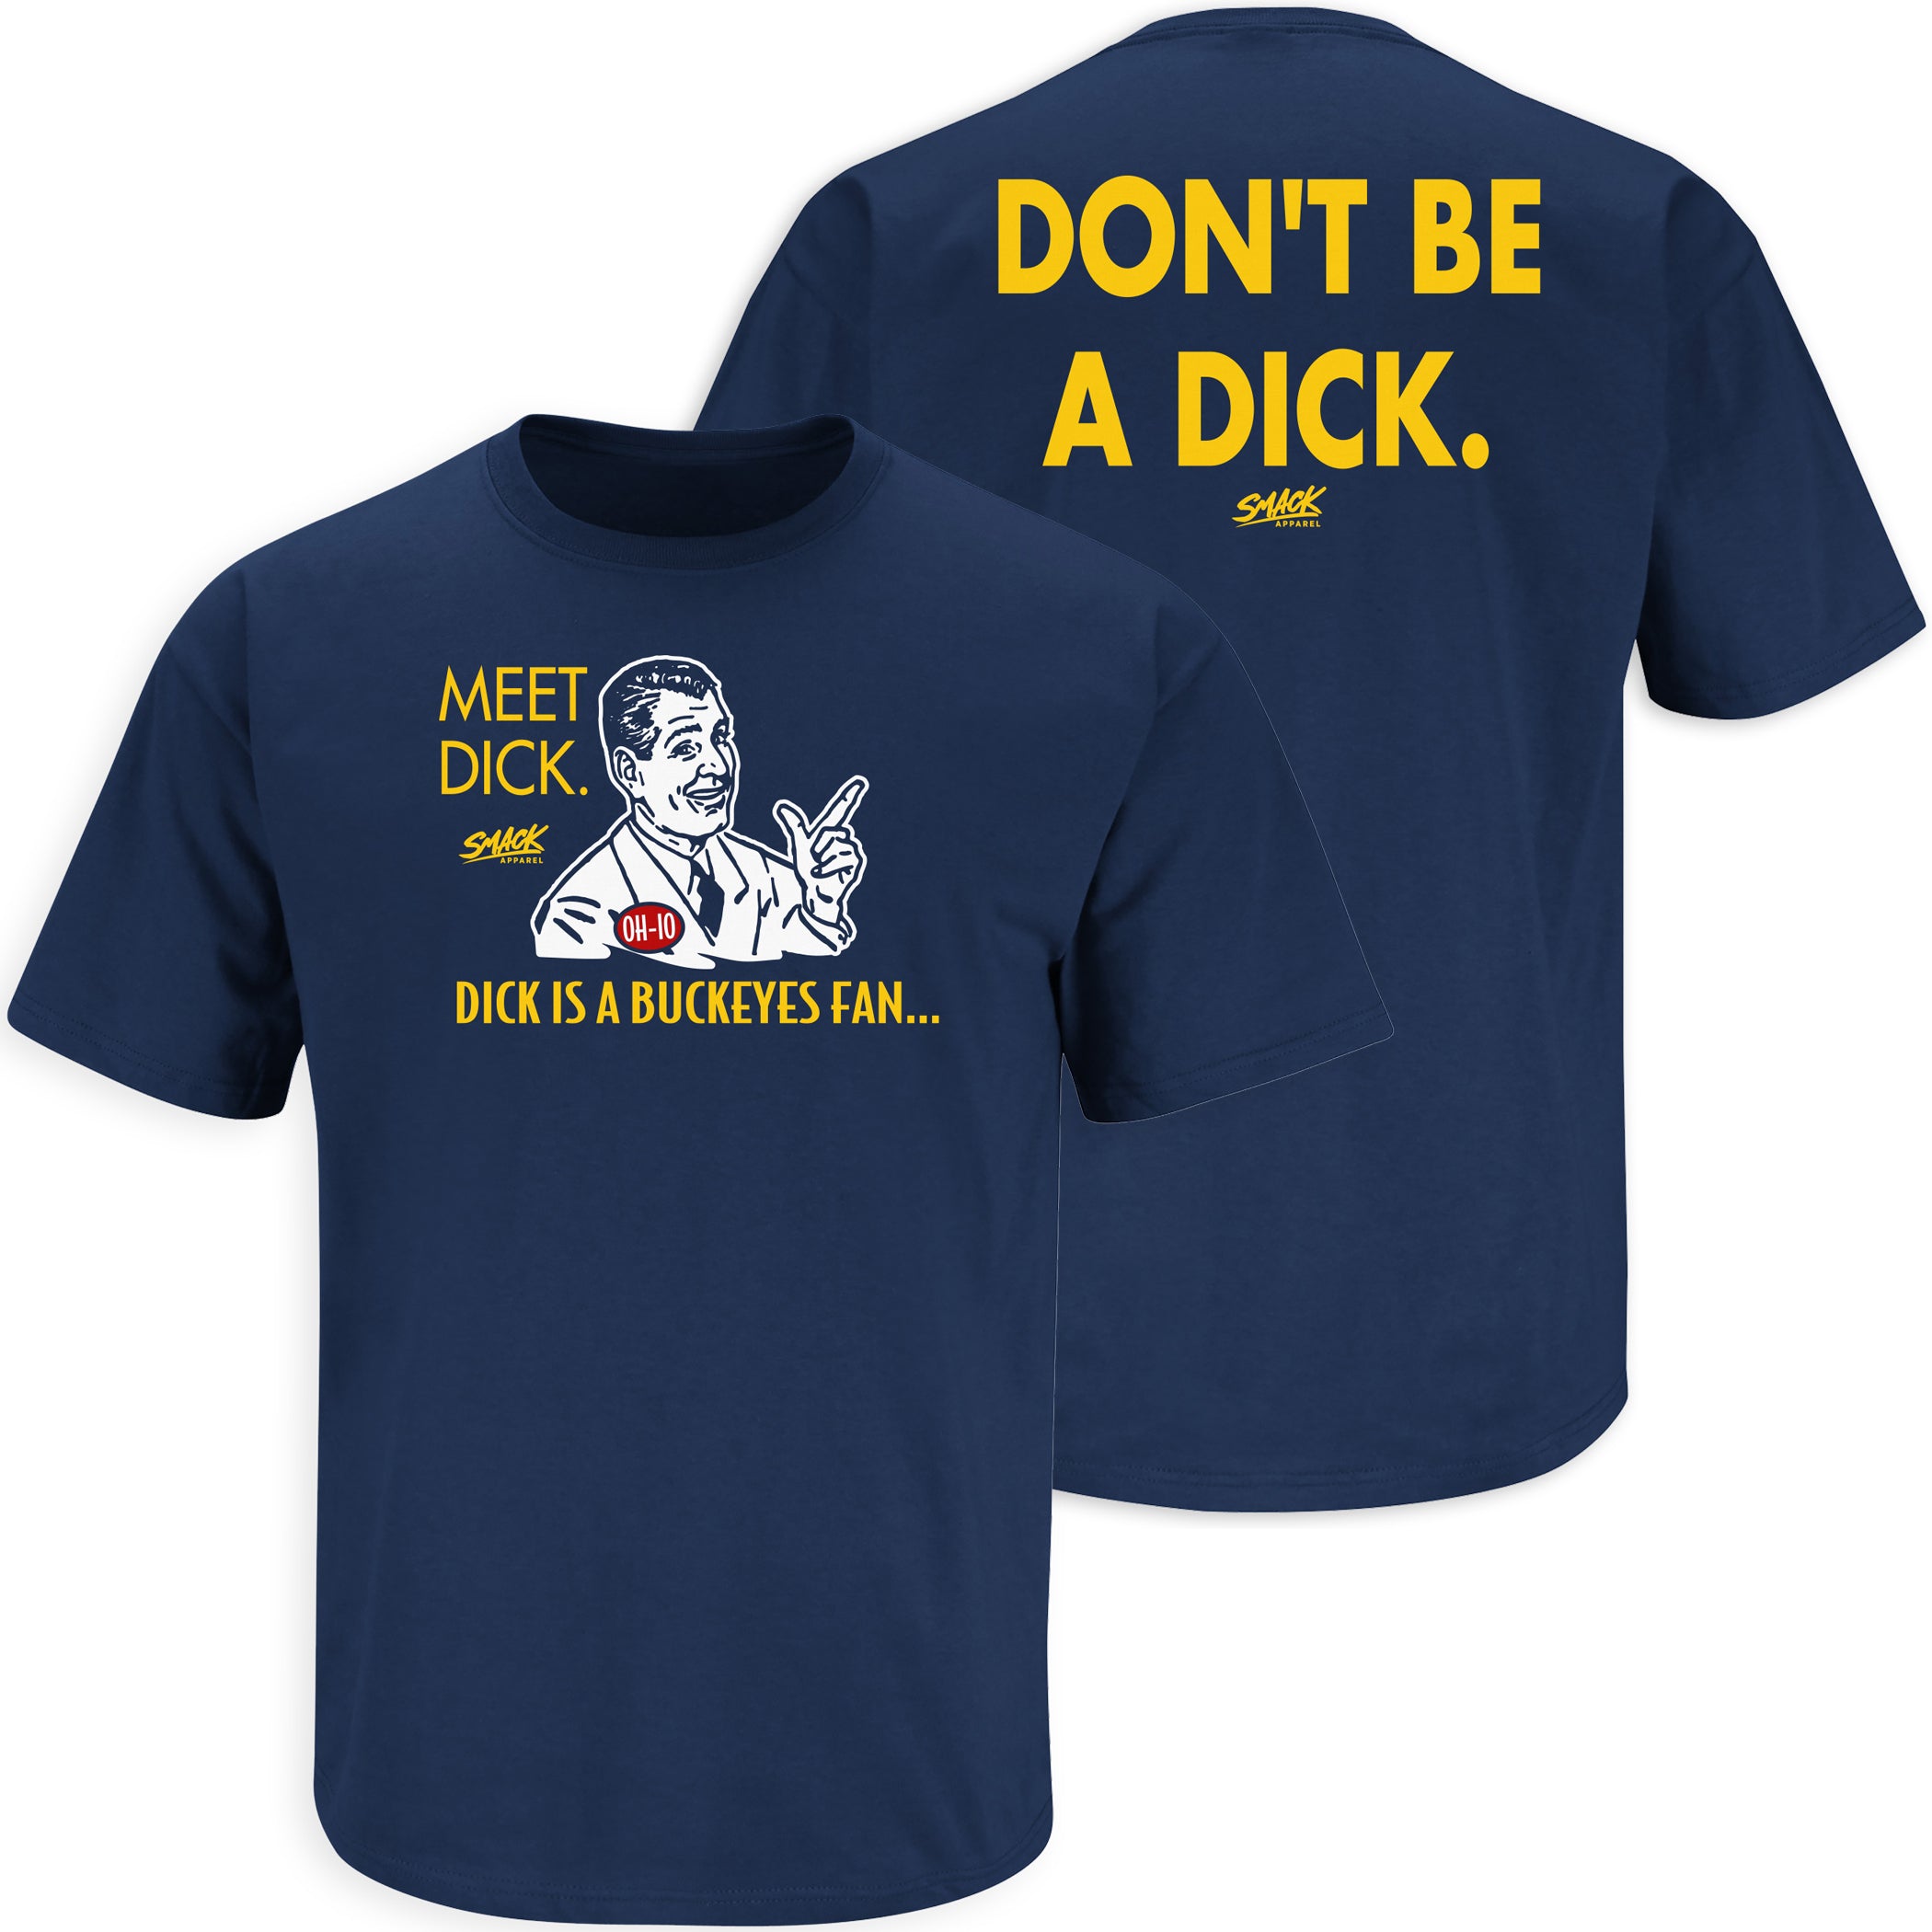 Michigan Football Fans. Don't be a Dick (Anti-Buckeyes or Anti-Spartans) T-Shirt